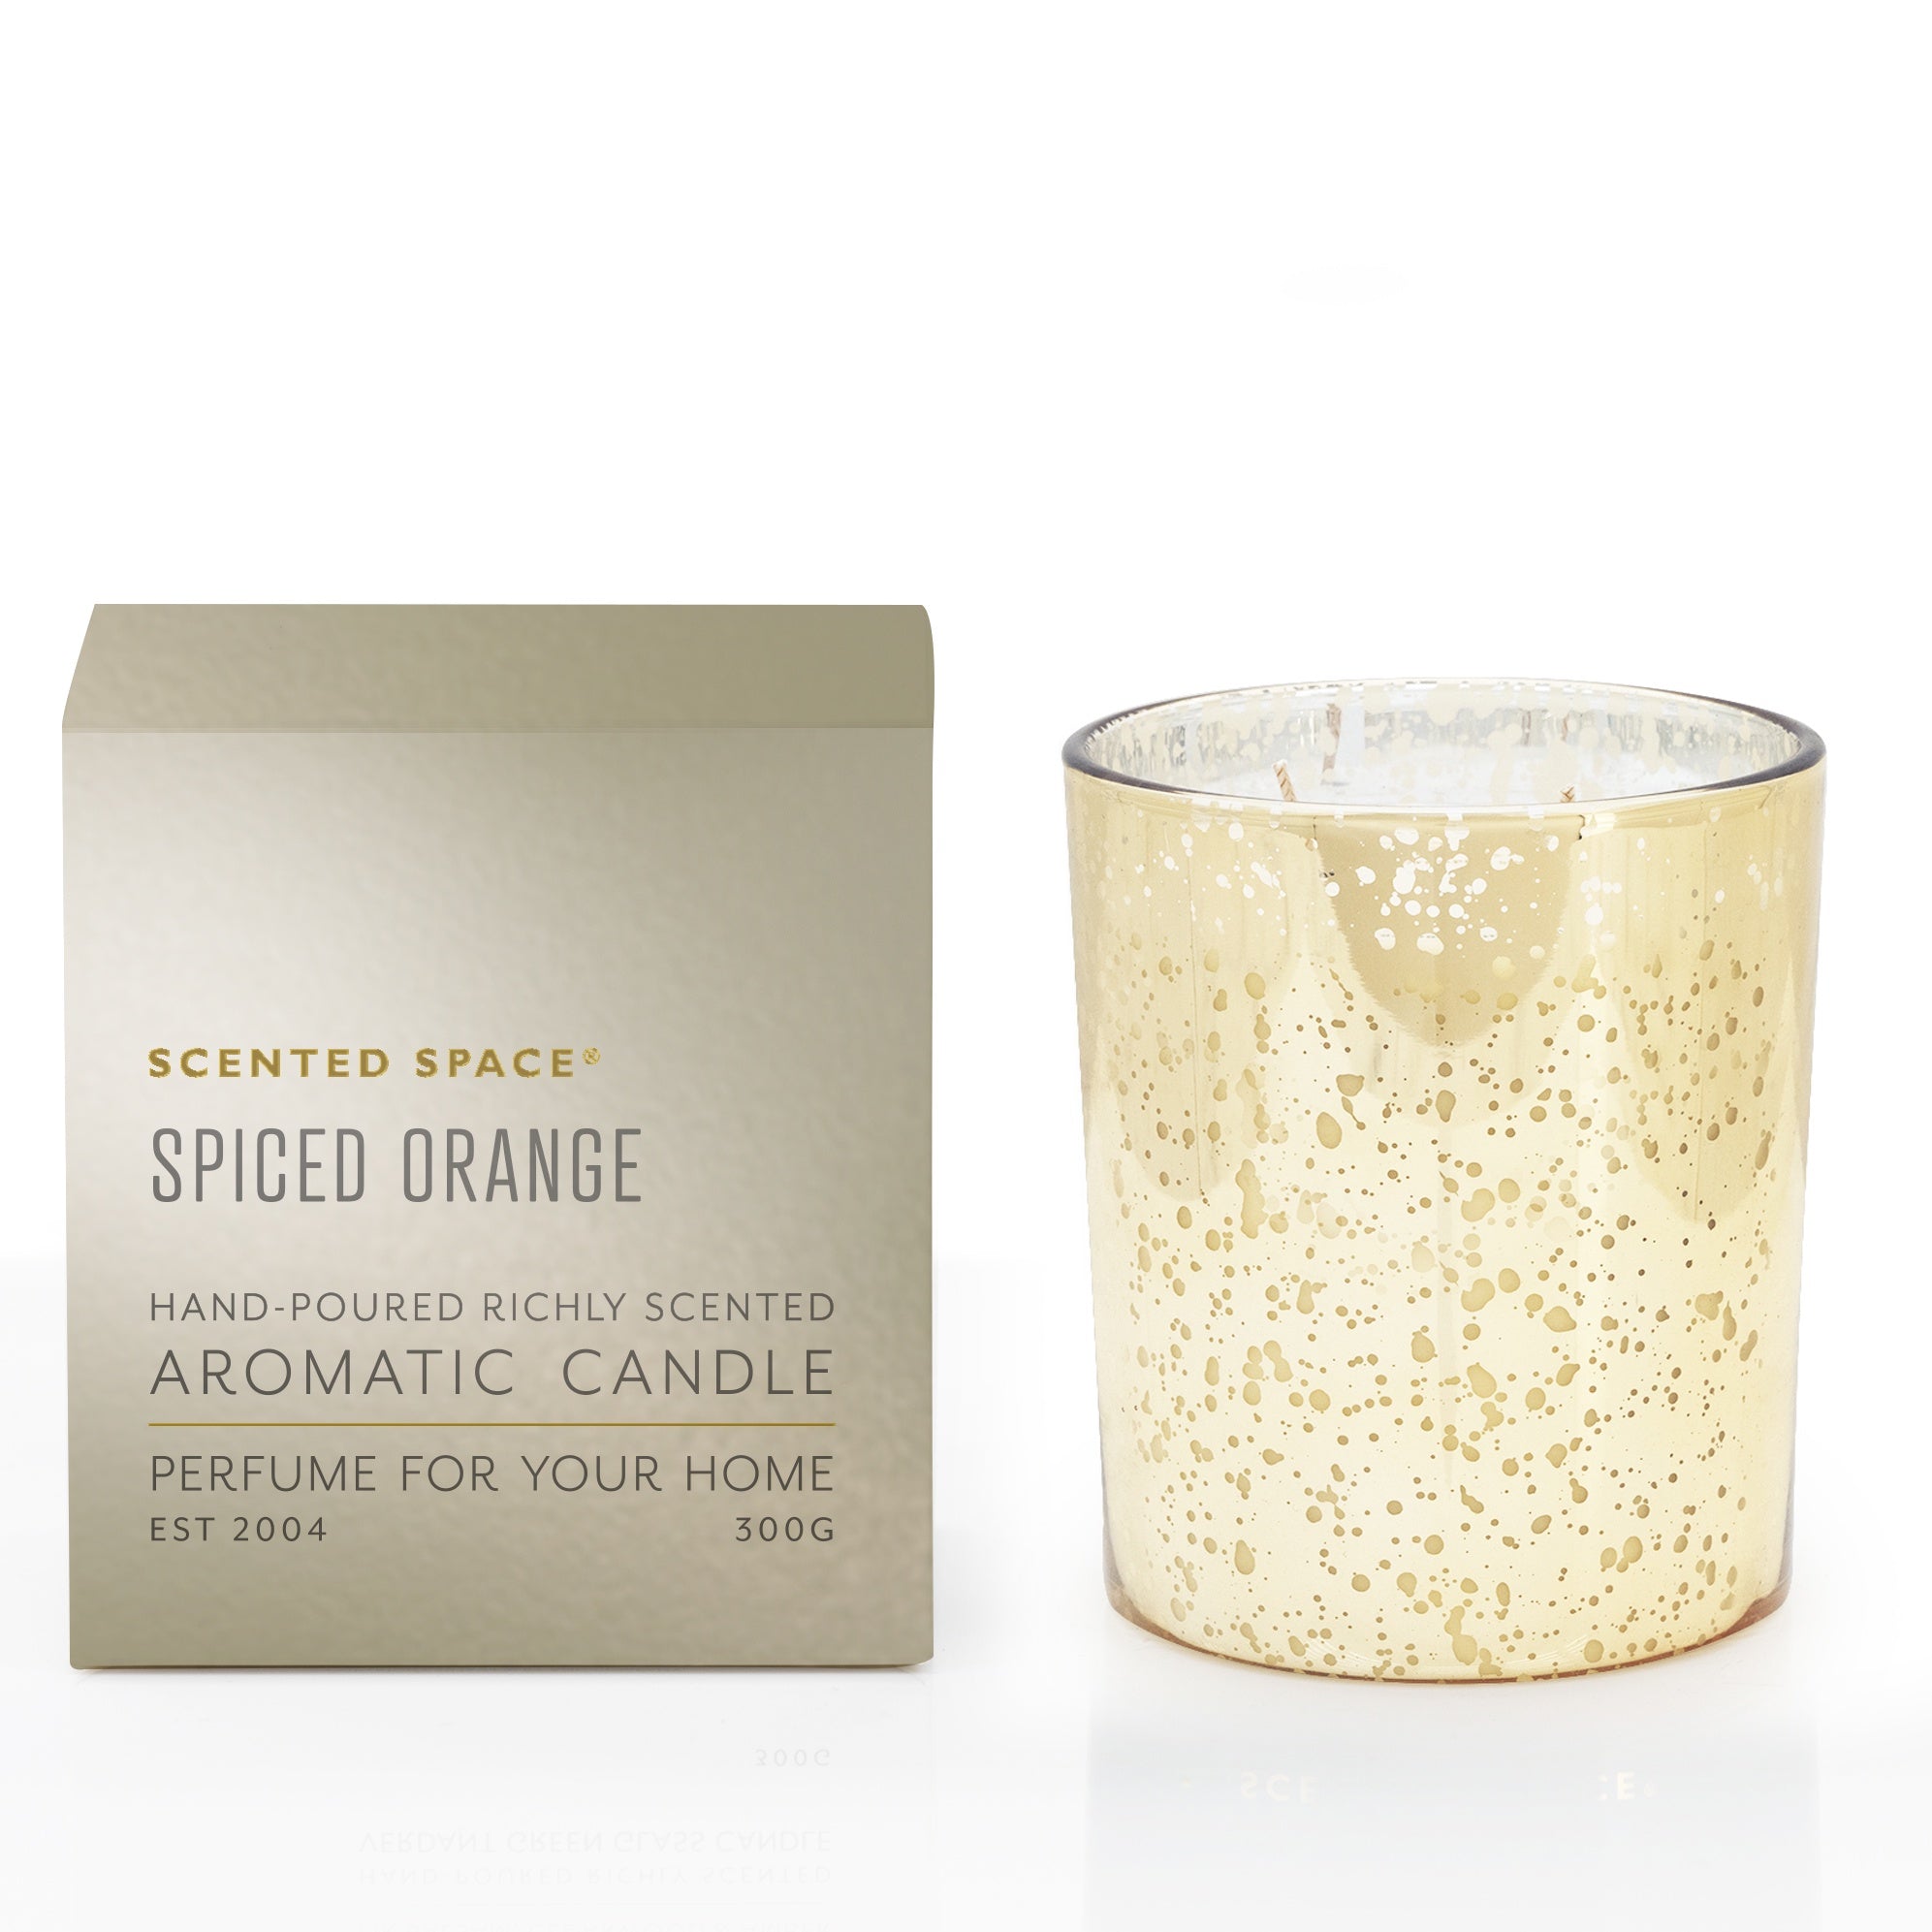 SS Spiced Orange Candle 300g